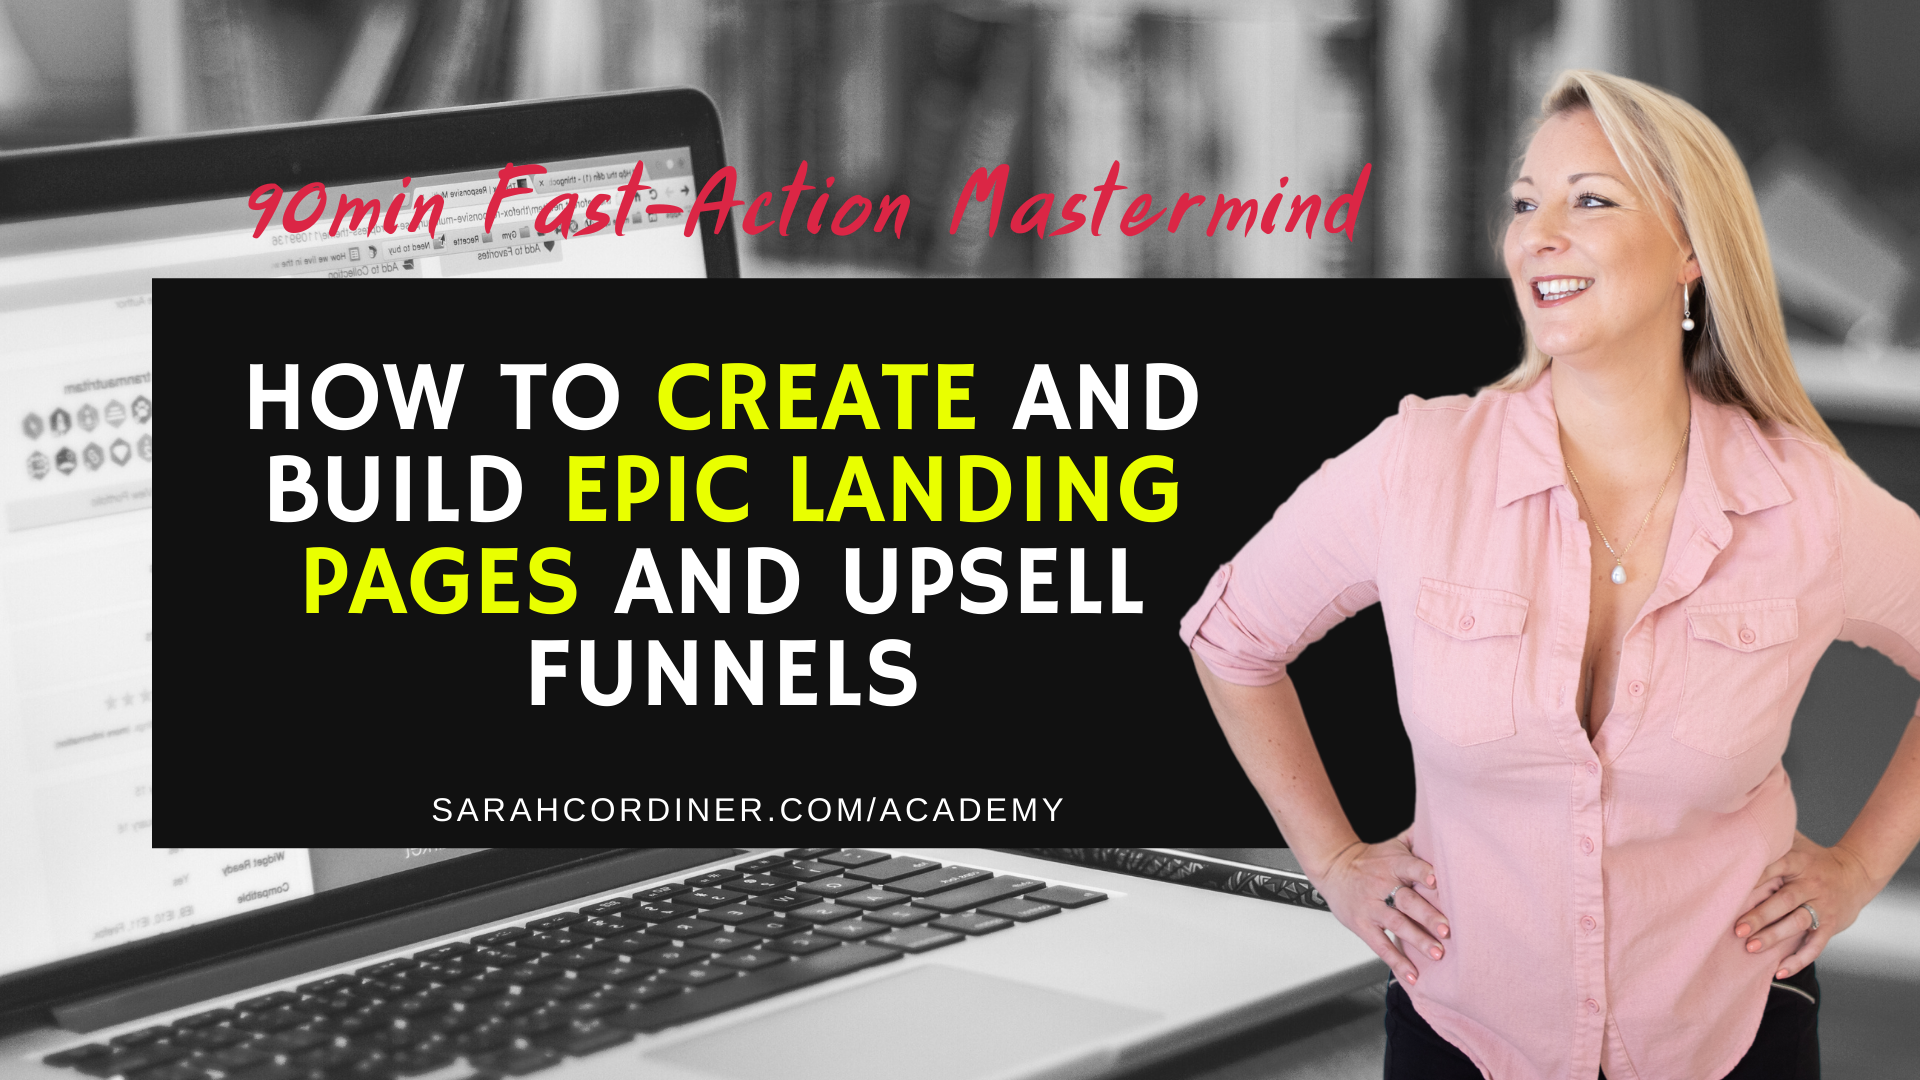 How To Create and Build Epic Landing Pages and Upsell Funnels